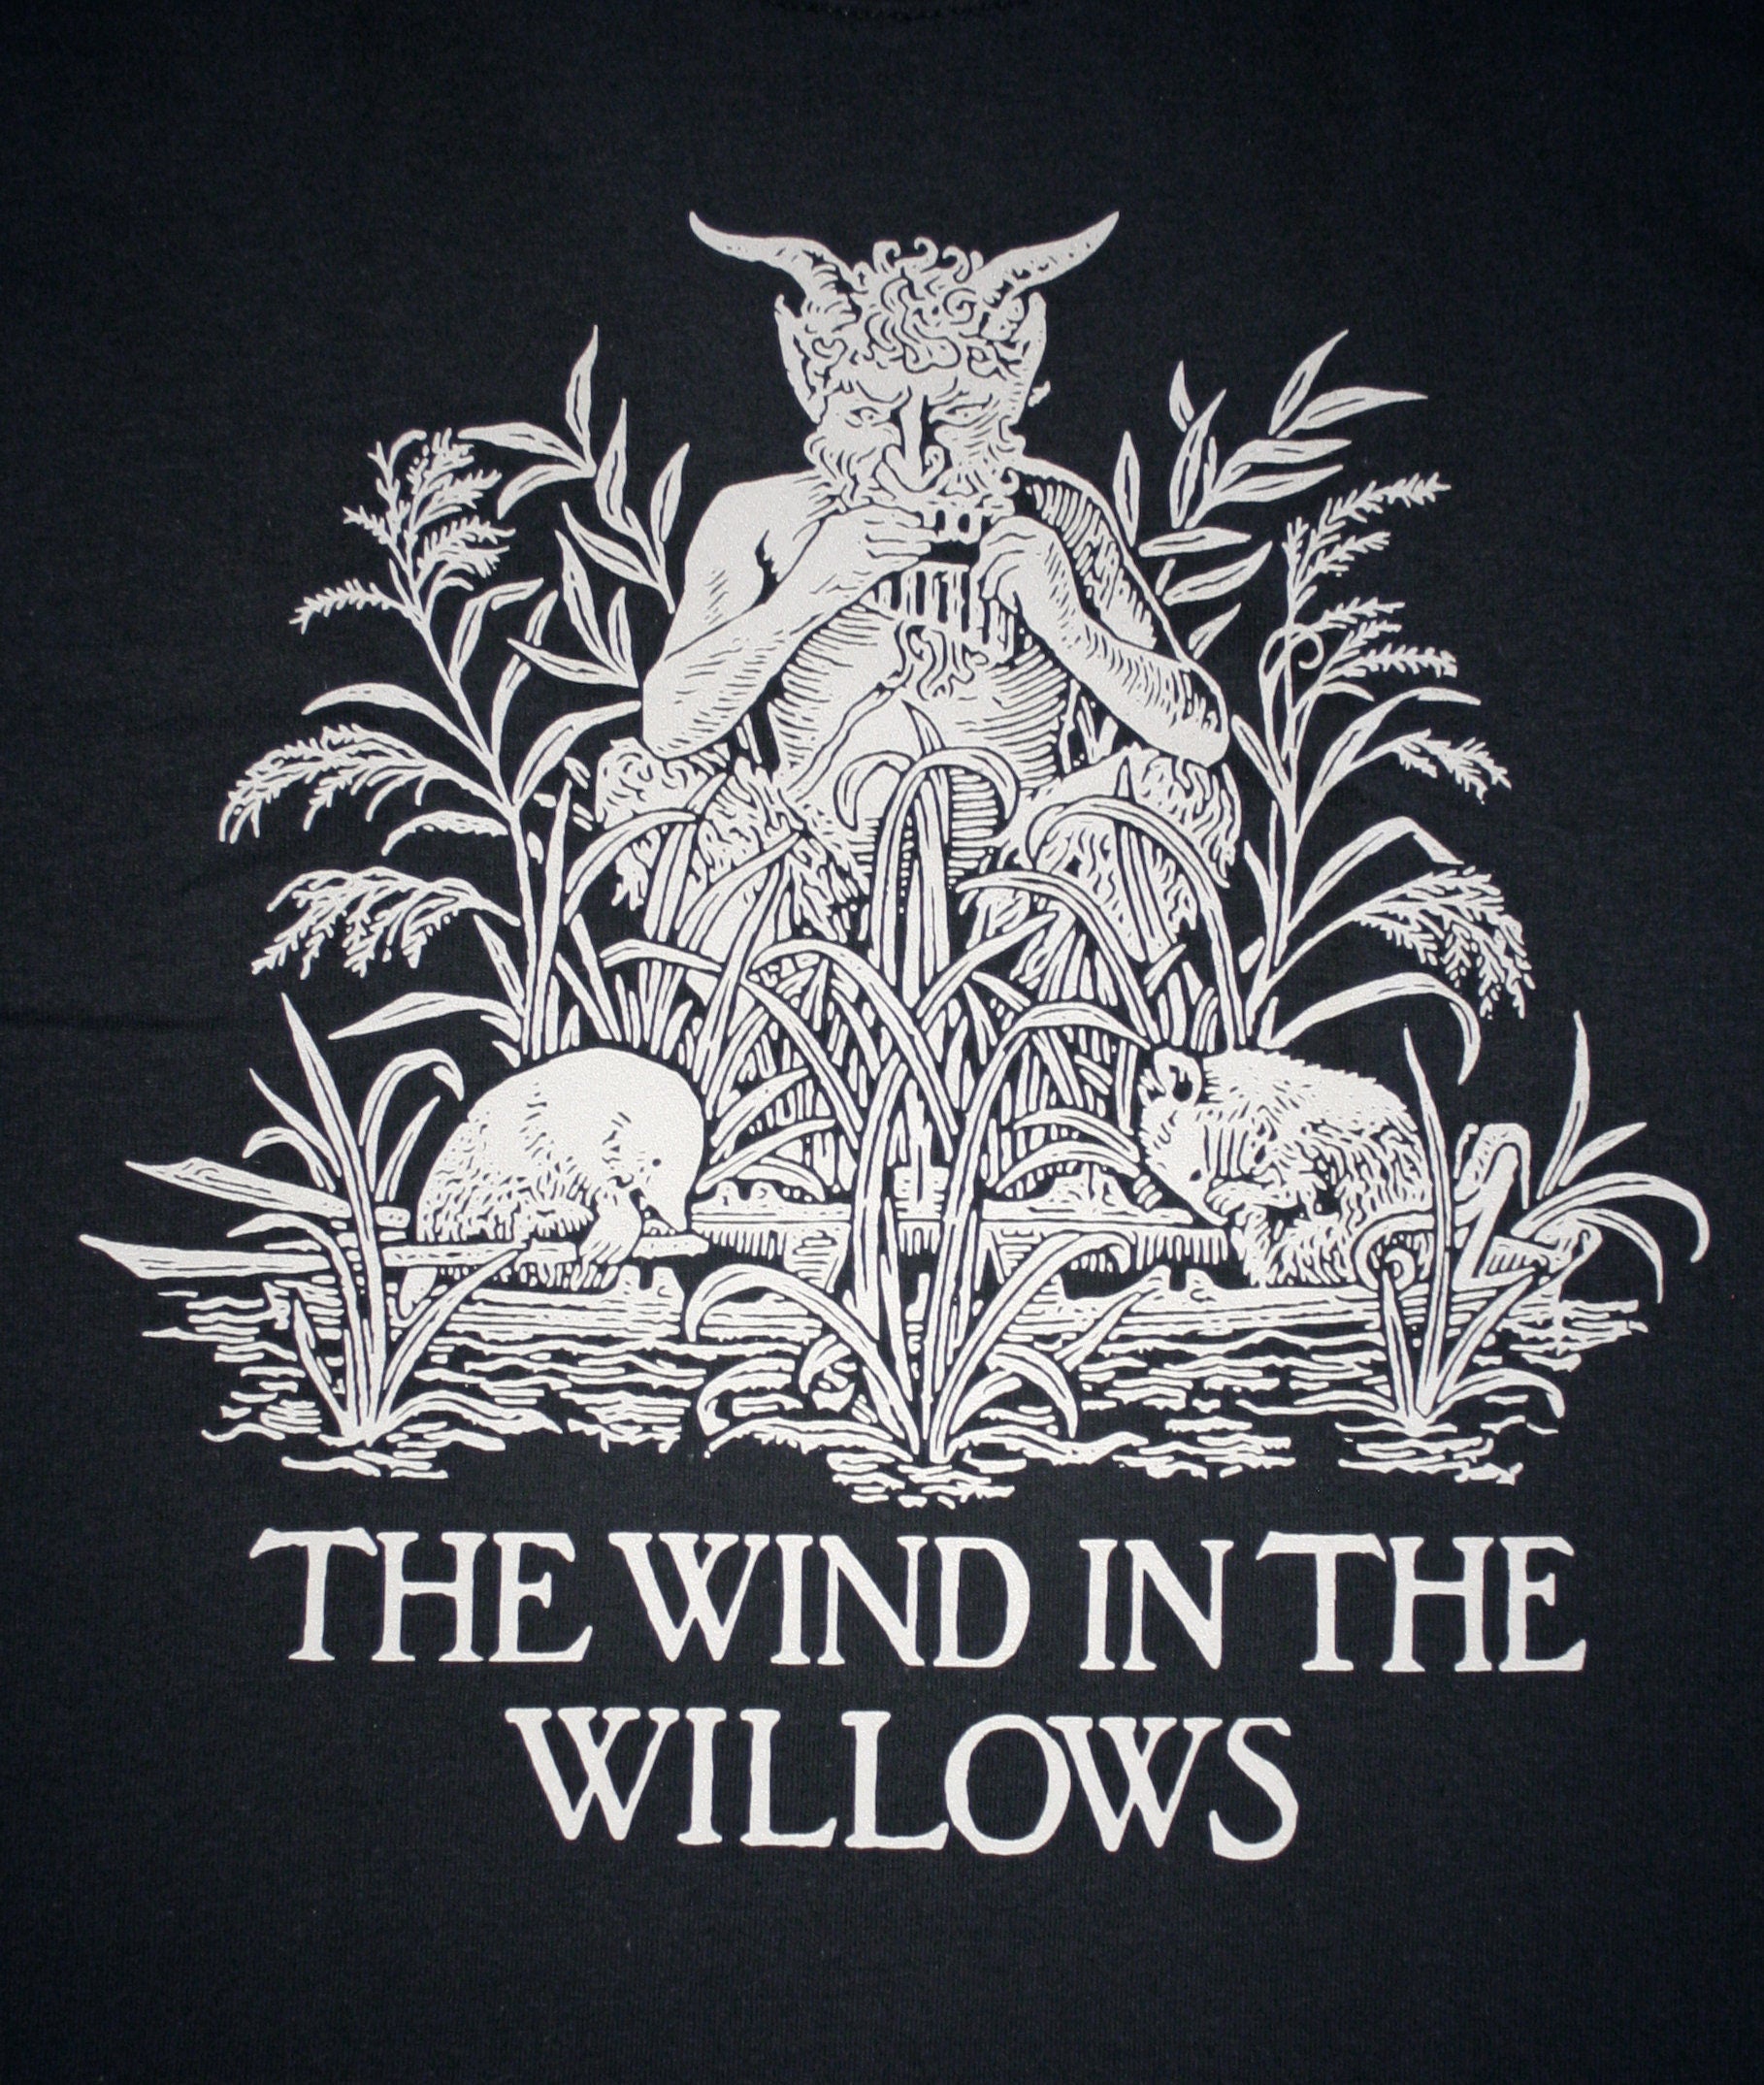 Wind in the Willows - T-shirt female fitted